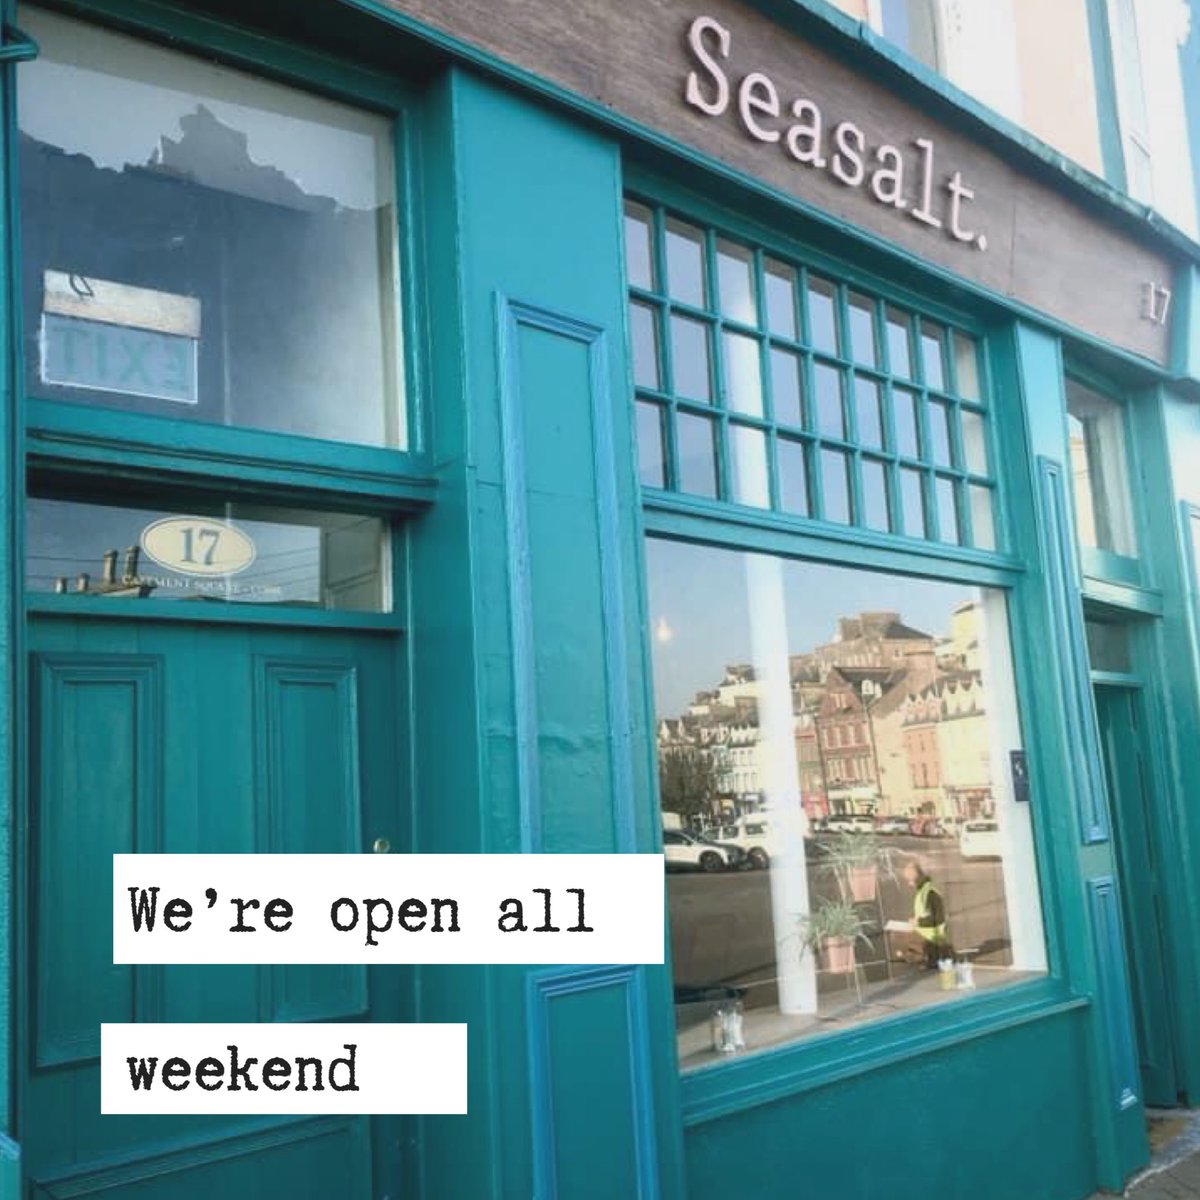 We’re open 10-5.30 Friday - Sunday. Give us a call & we’ll arrange a collection time. 021 4813383
See yesterday’s posts for menus
#seasaltcobh #cobh